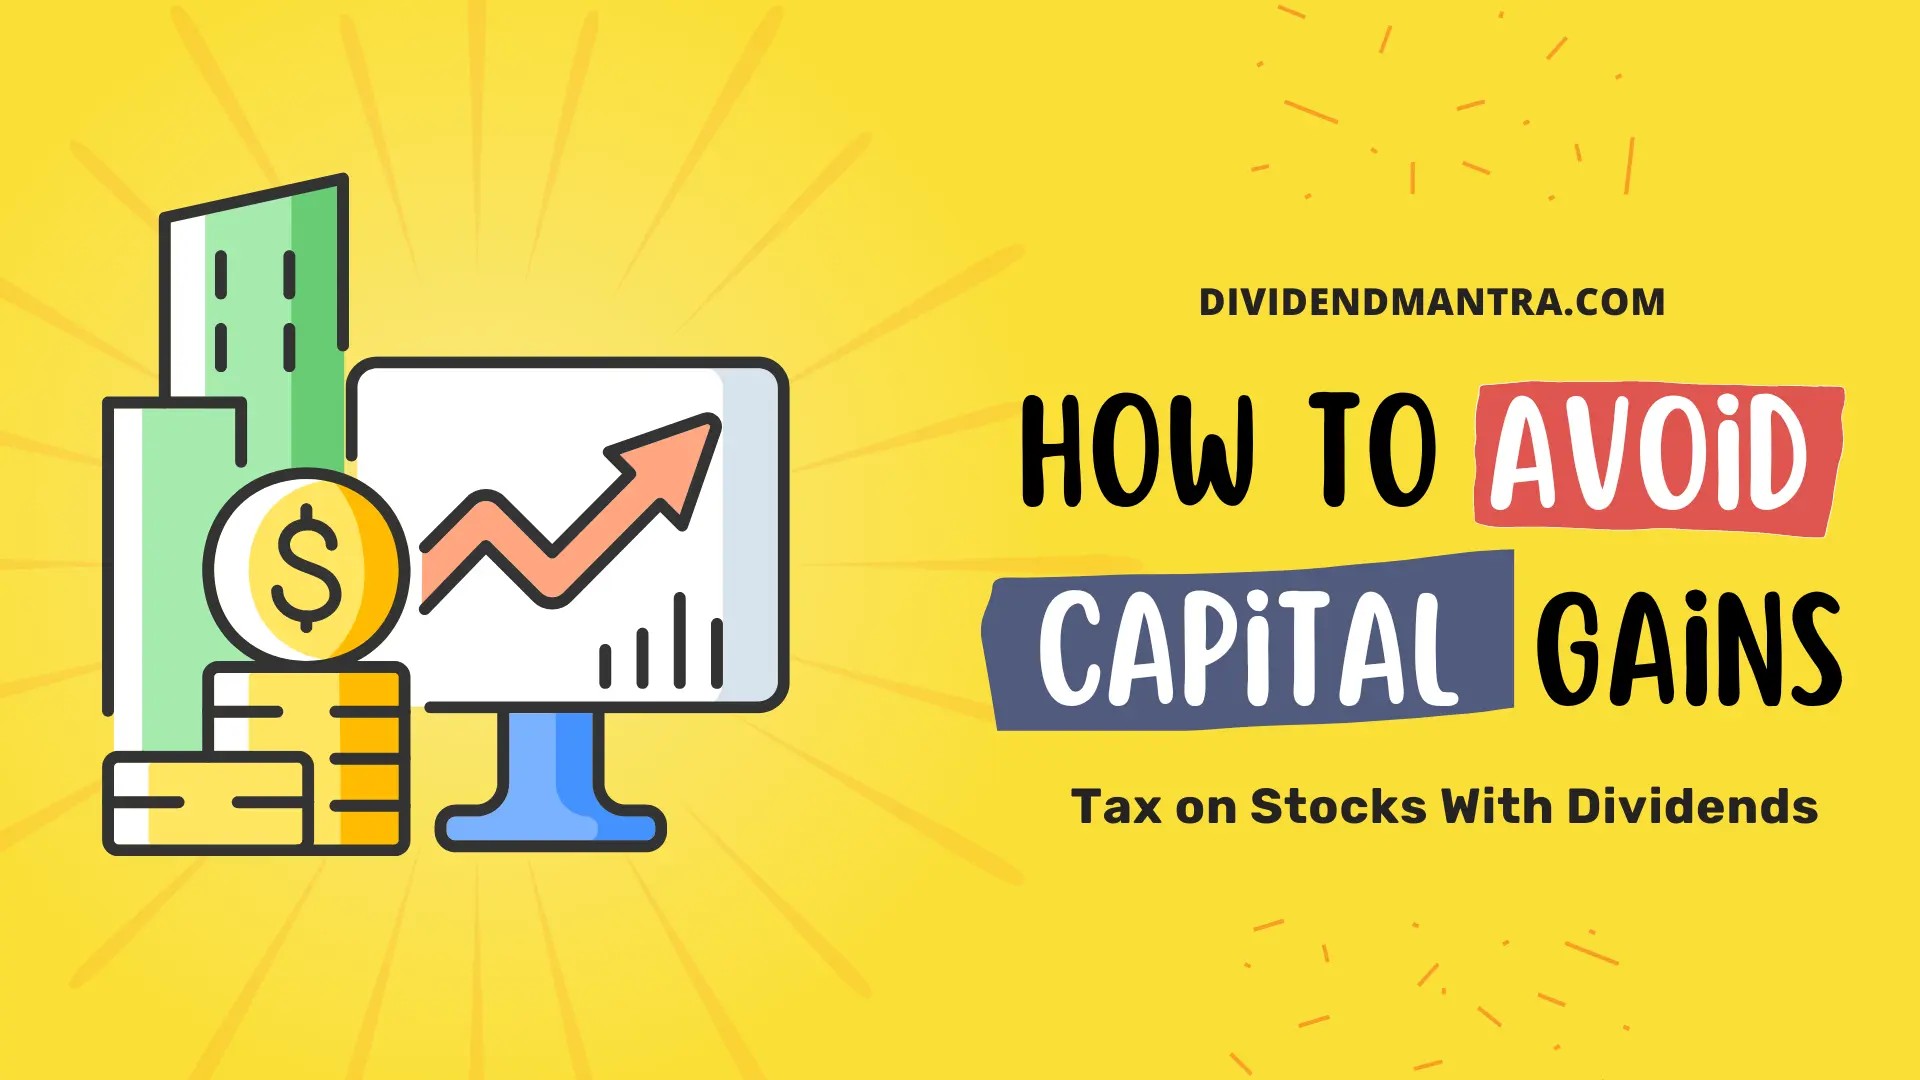 How To Avoid Capital Gains Tax on Stocks With Dividends